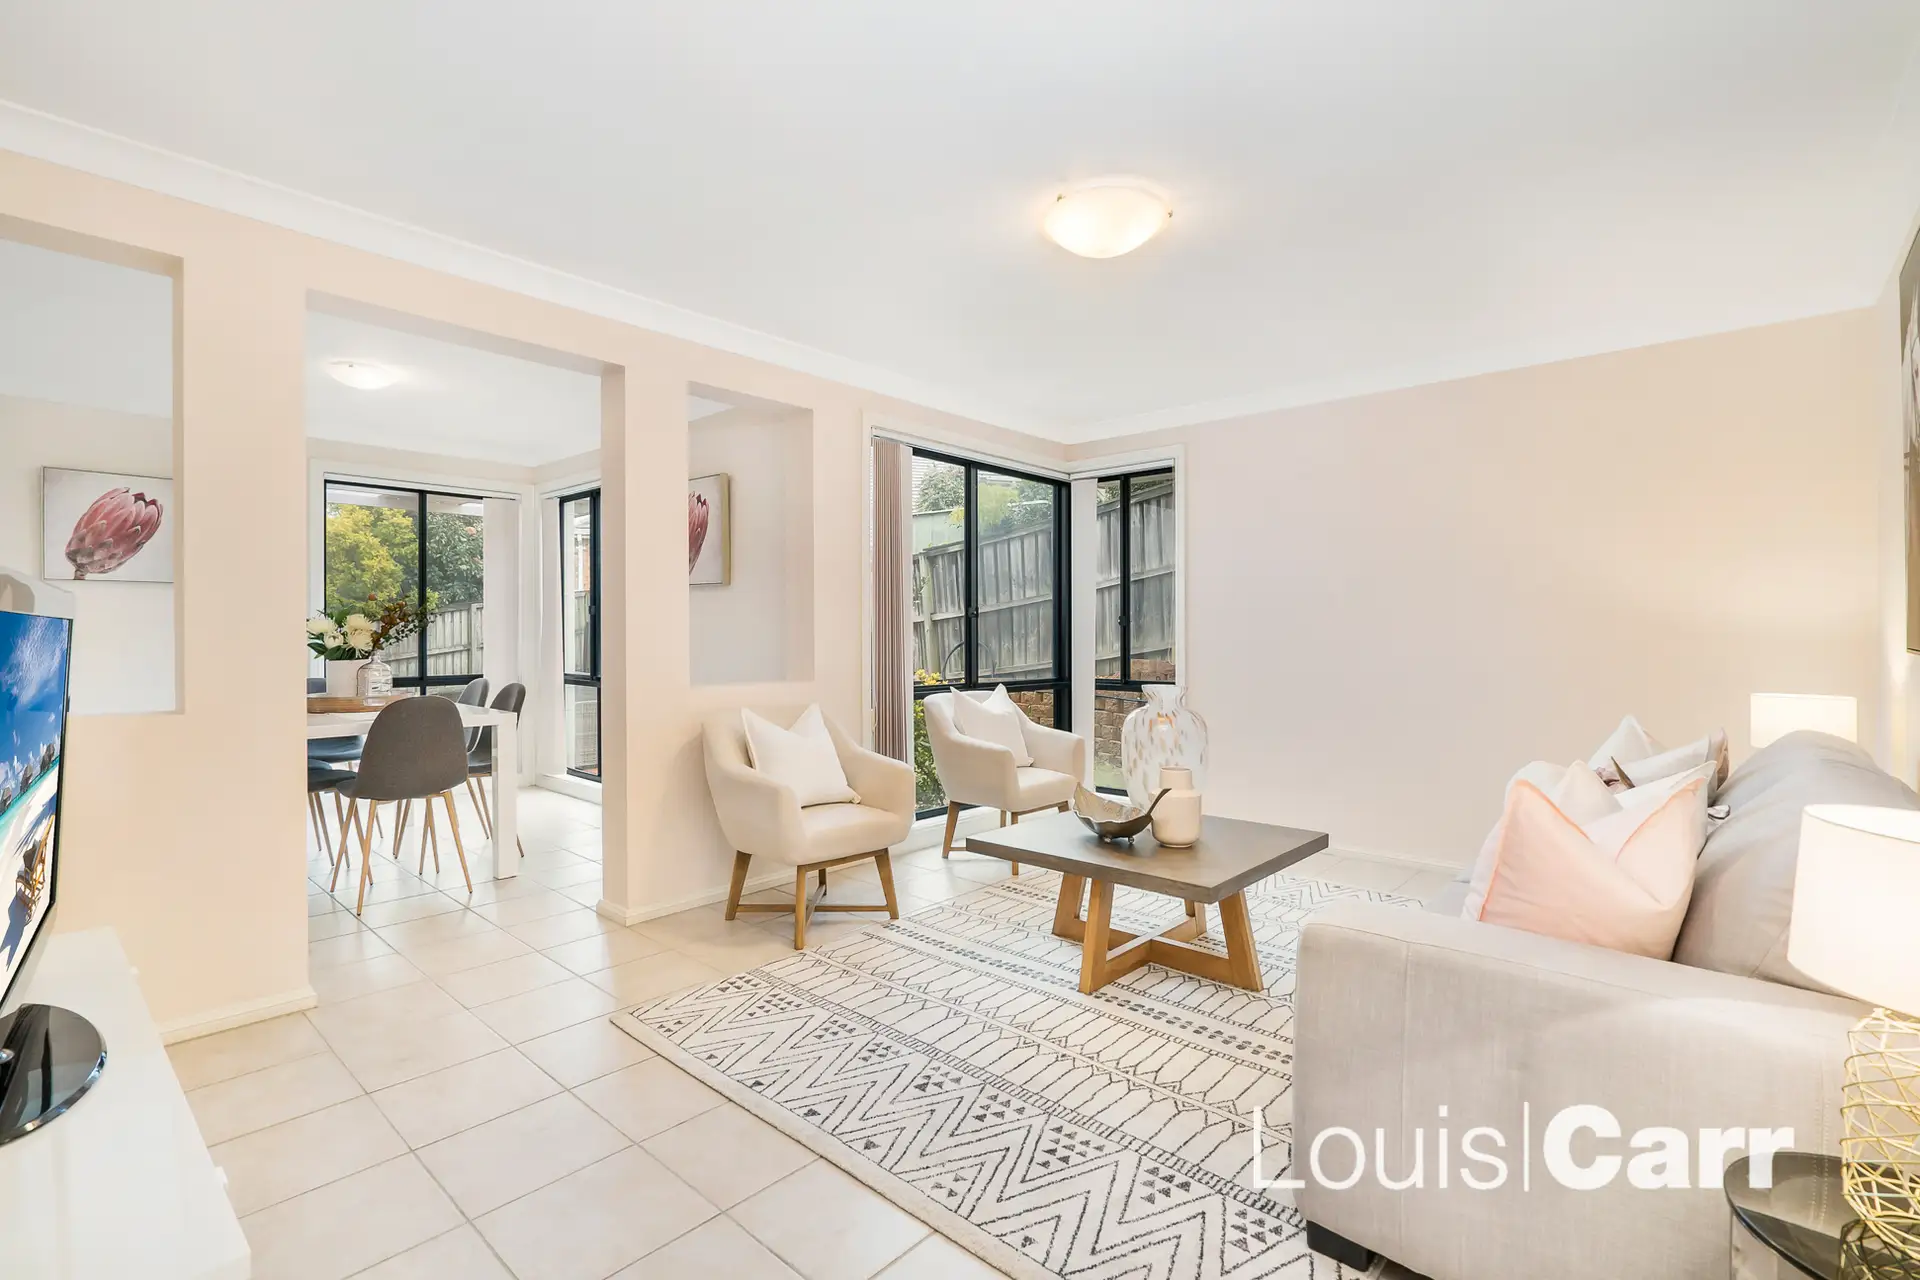 13 McCusker Crescent, Cherrybrook Sold by Louis Carr Real Estate - image 4